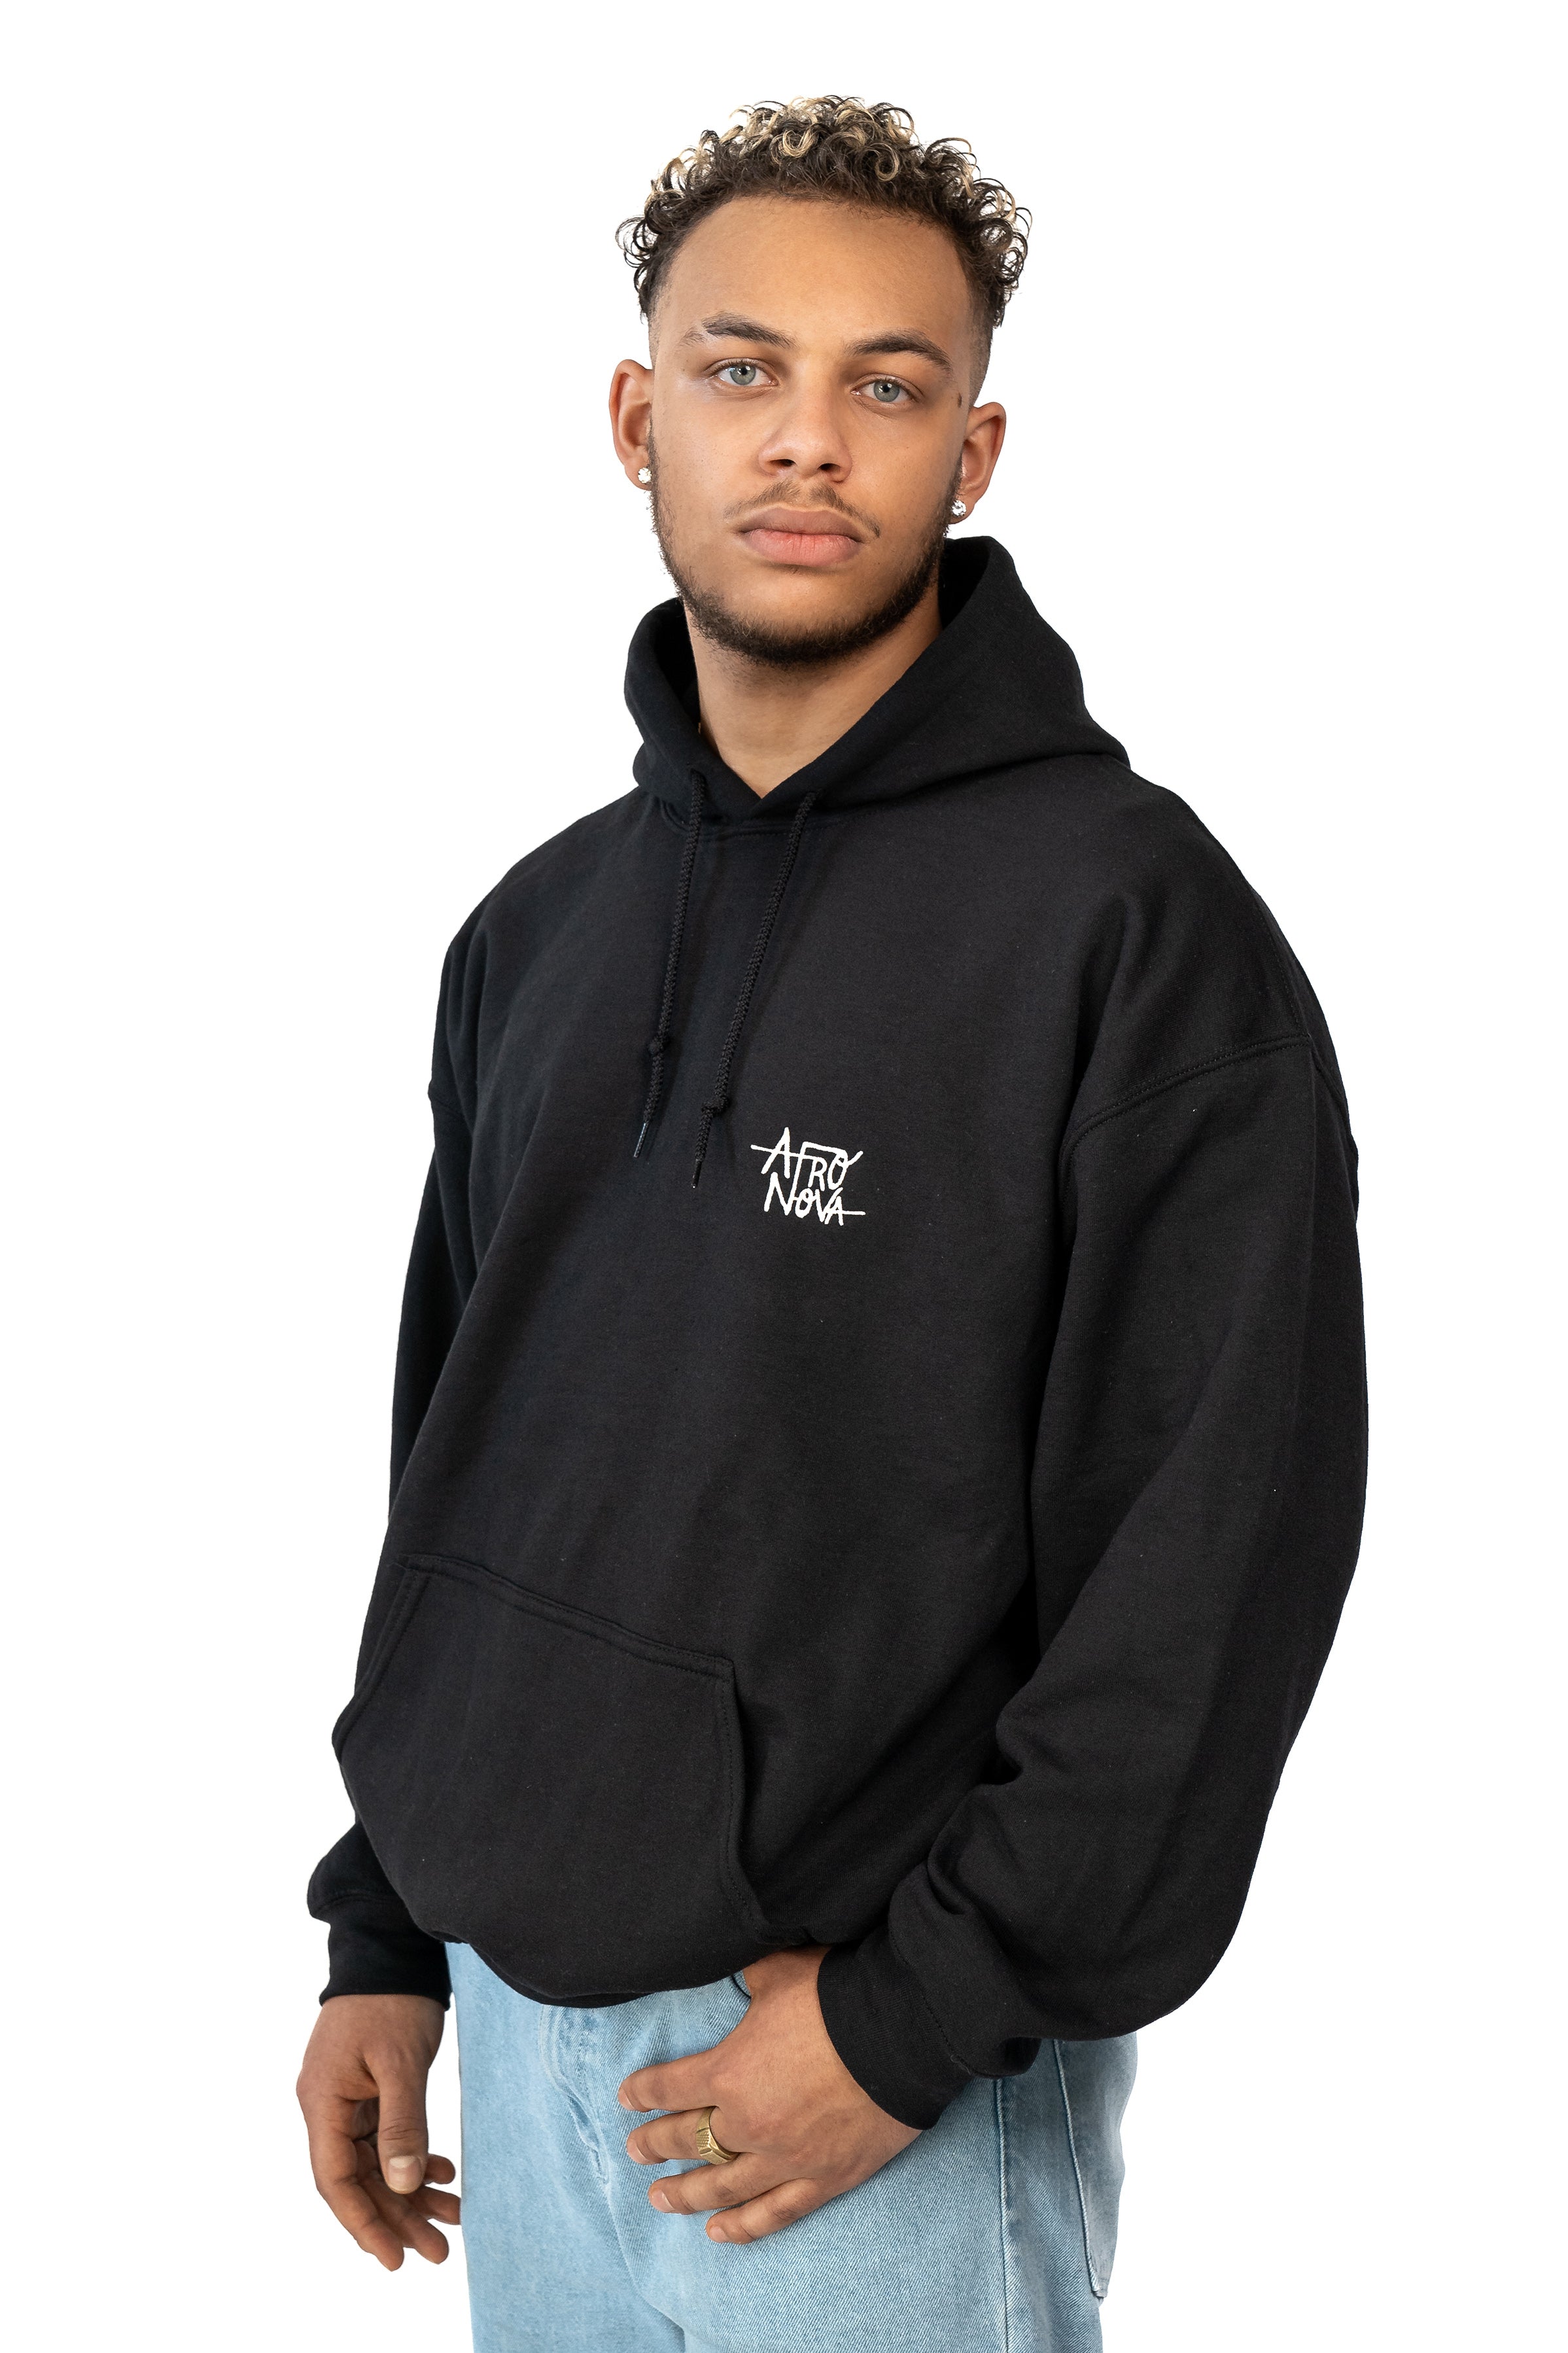 Man with curly hair and earrings wearing a casual black hoodie 